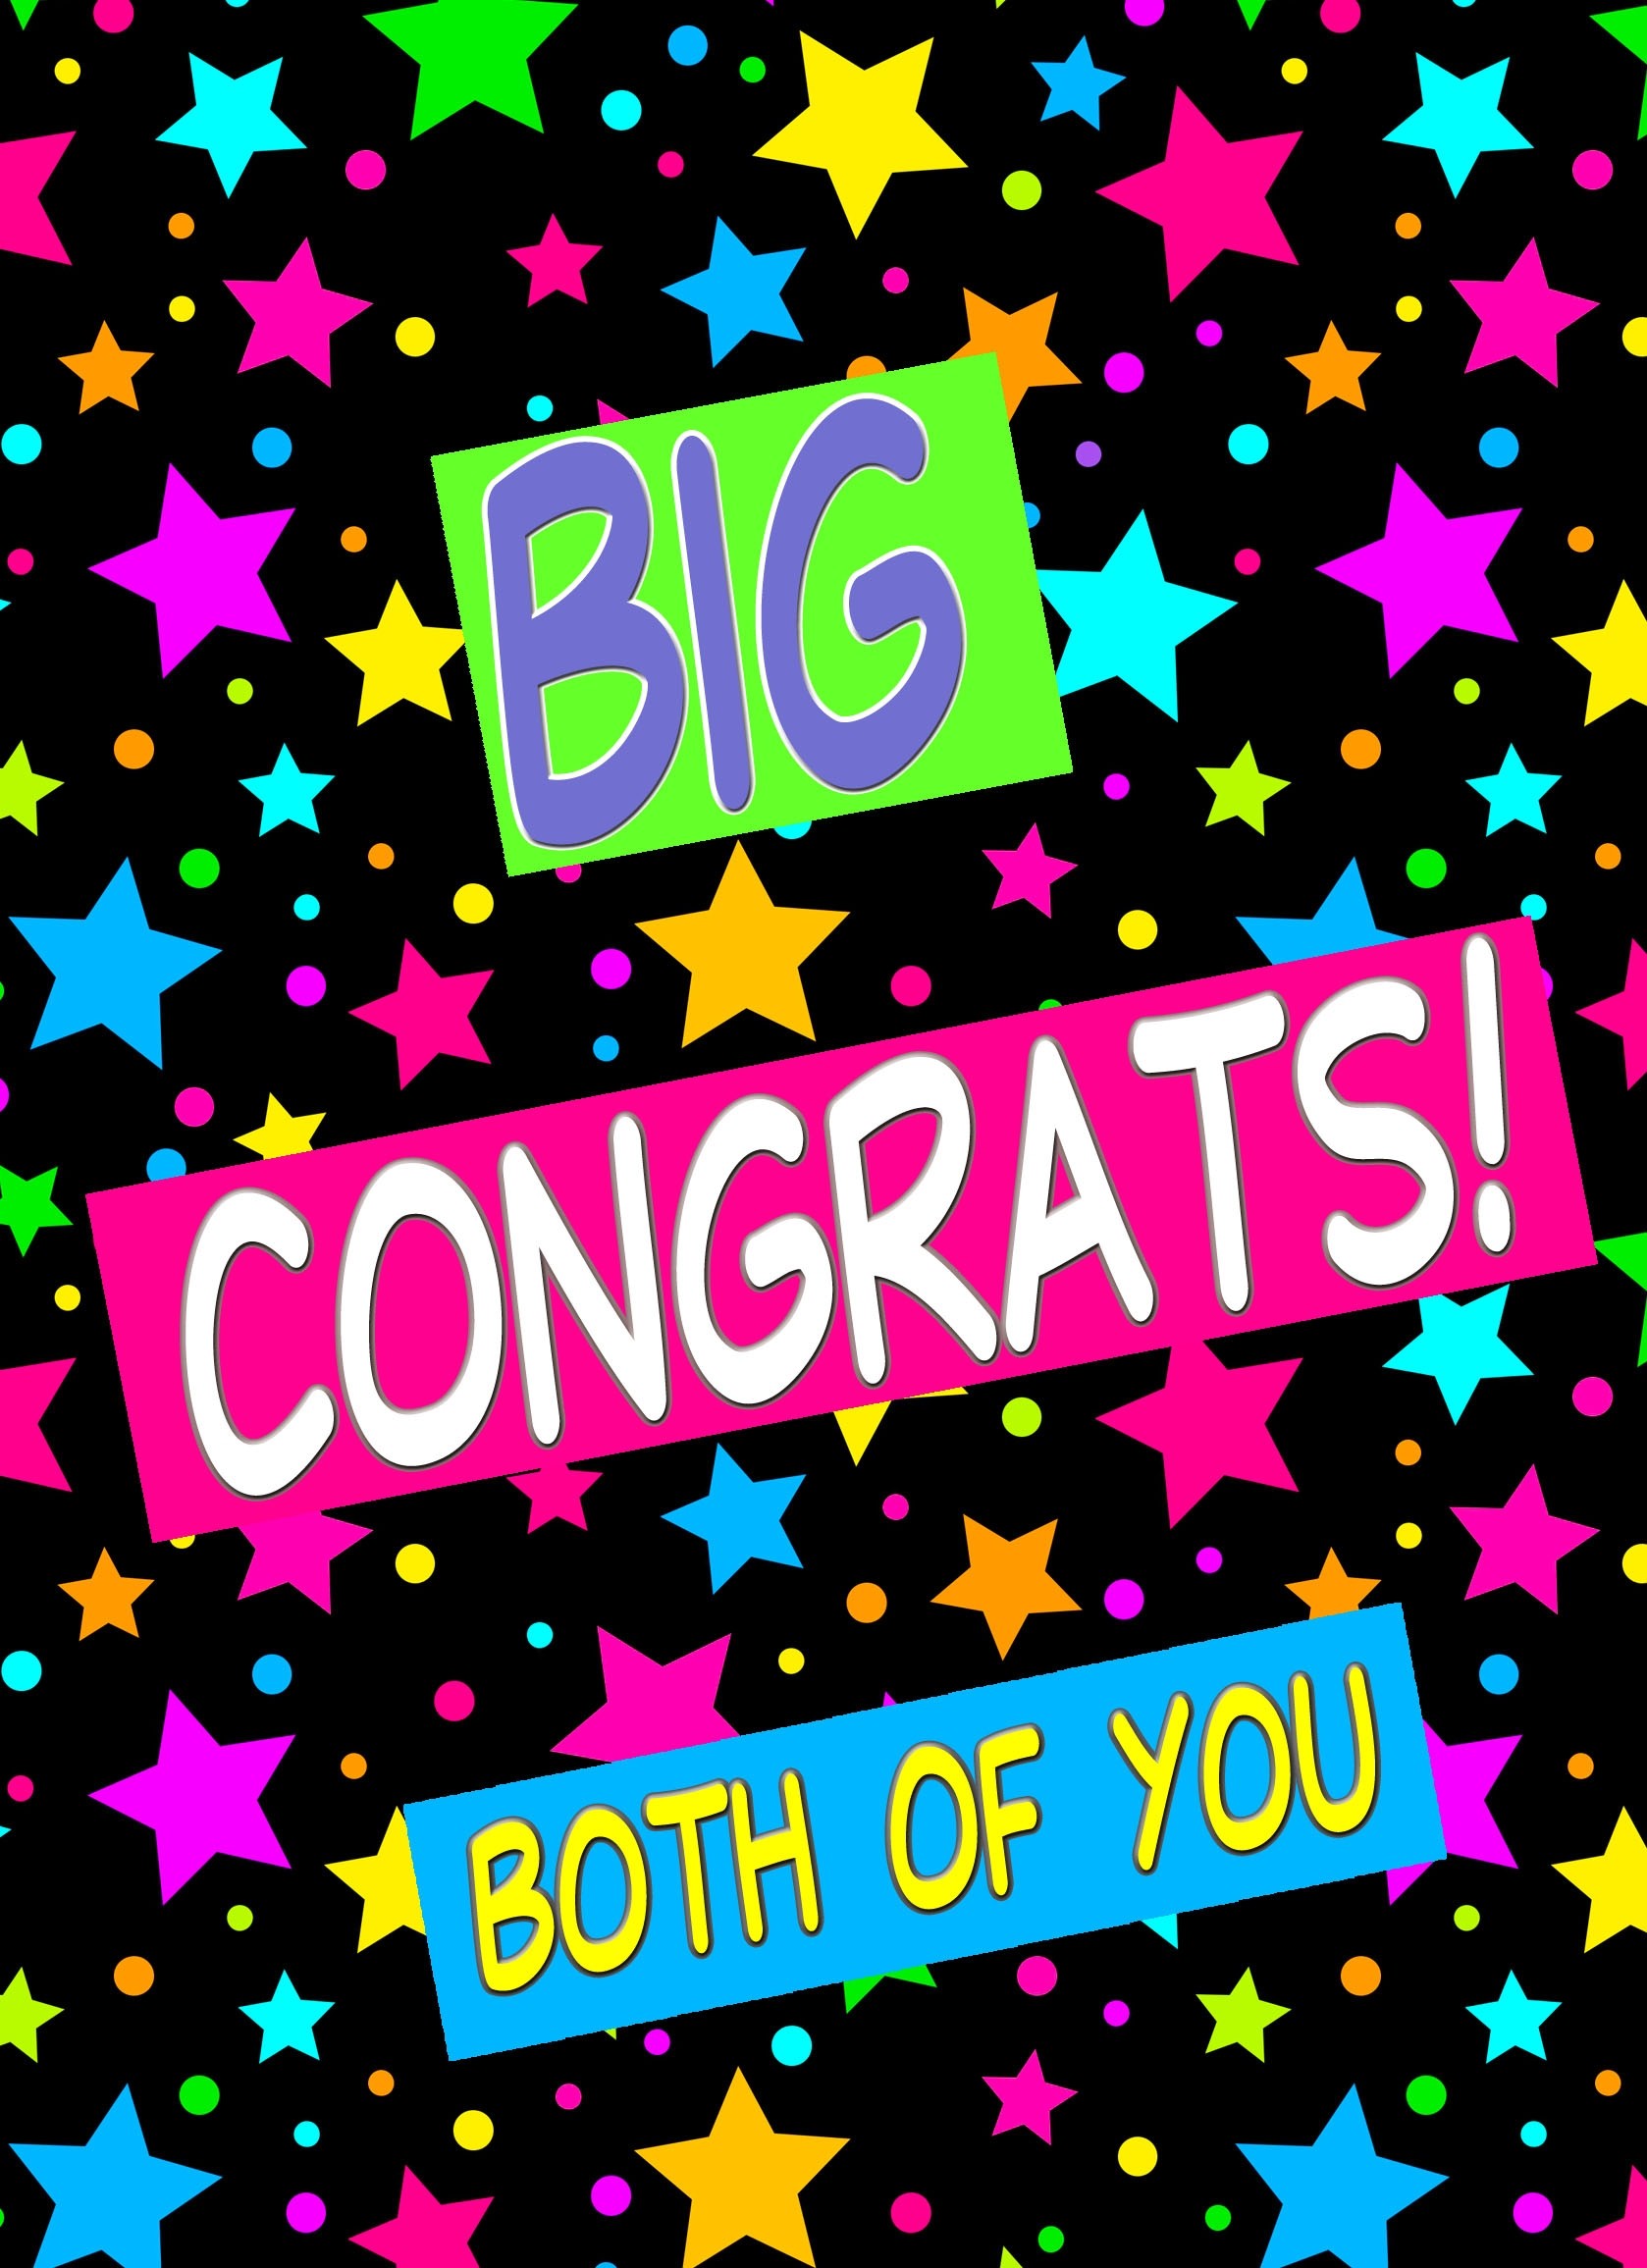 Congratulations Card For Both of You (Stars)